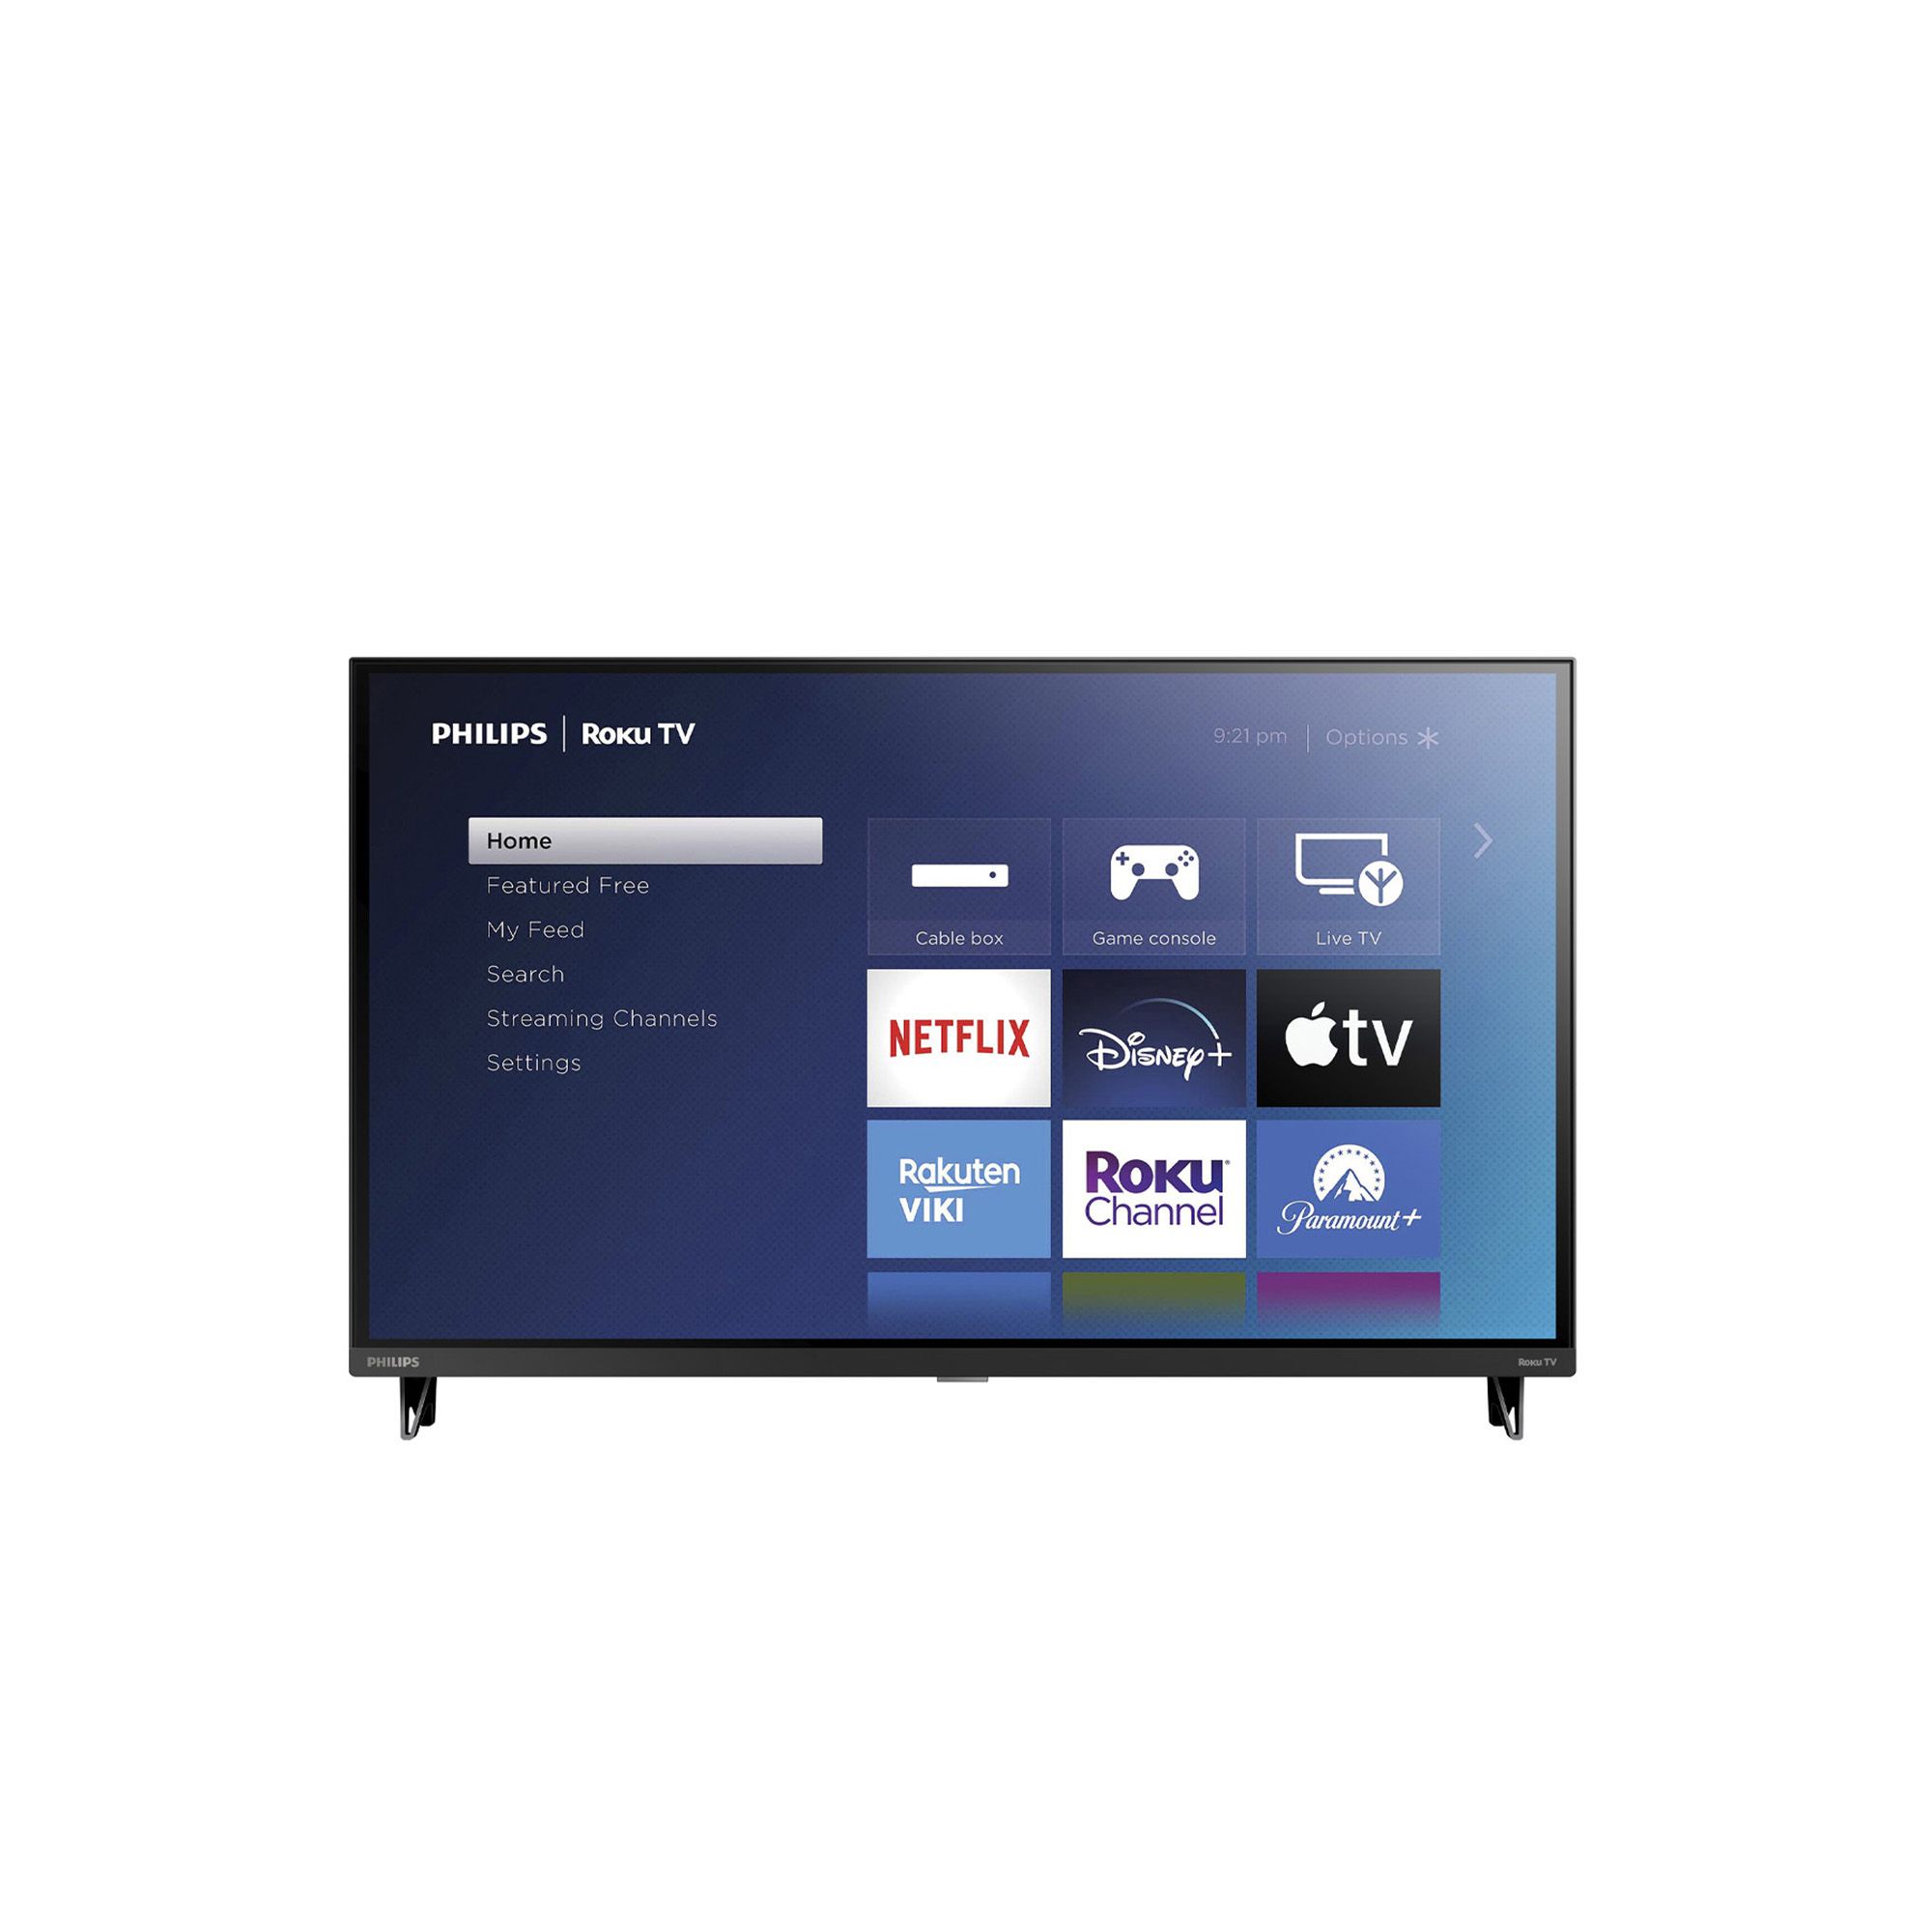 Philips 32 PFL64 HD Roku Smart TV with 3-Year Coverage